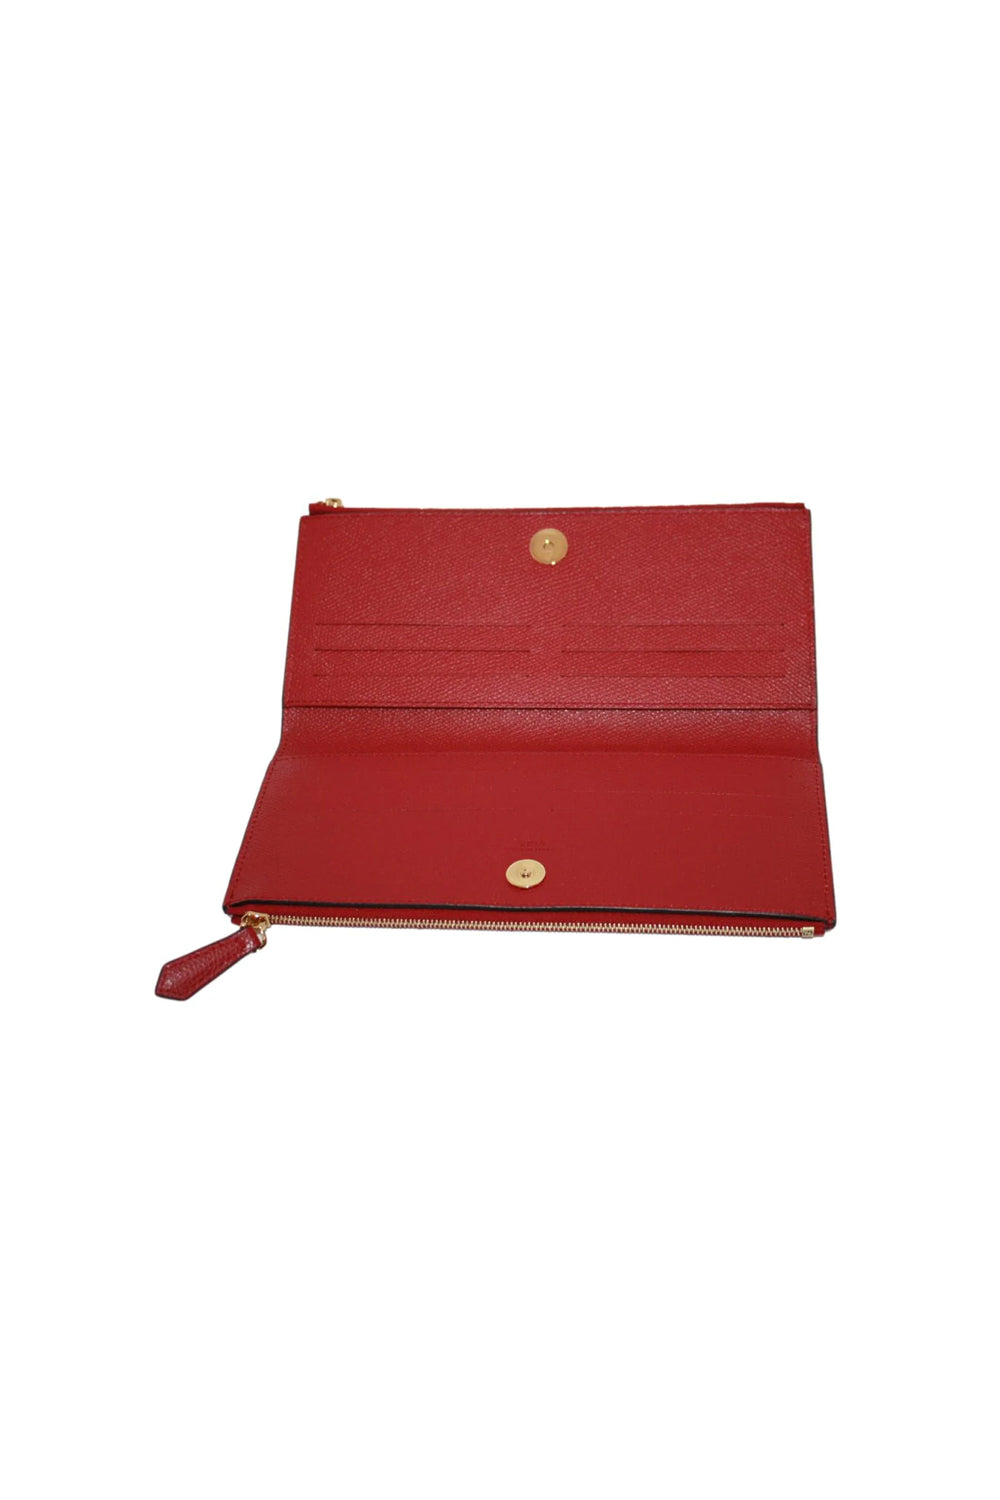 Fendi F Calf Leather Double Zip Long Wallet - Red